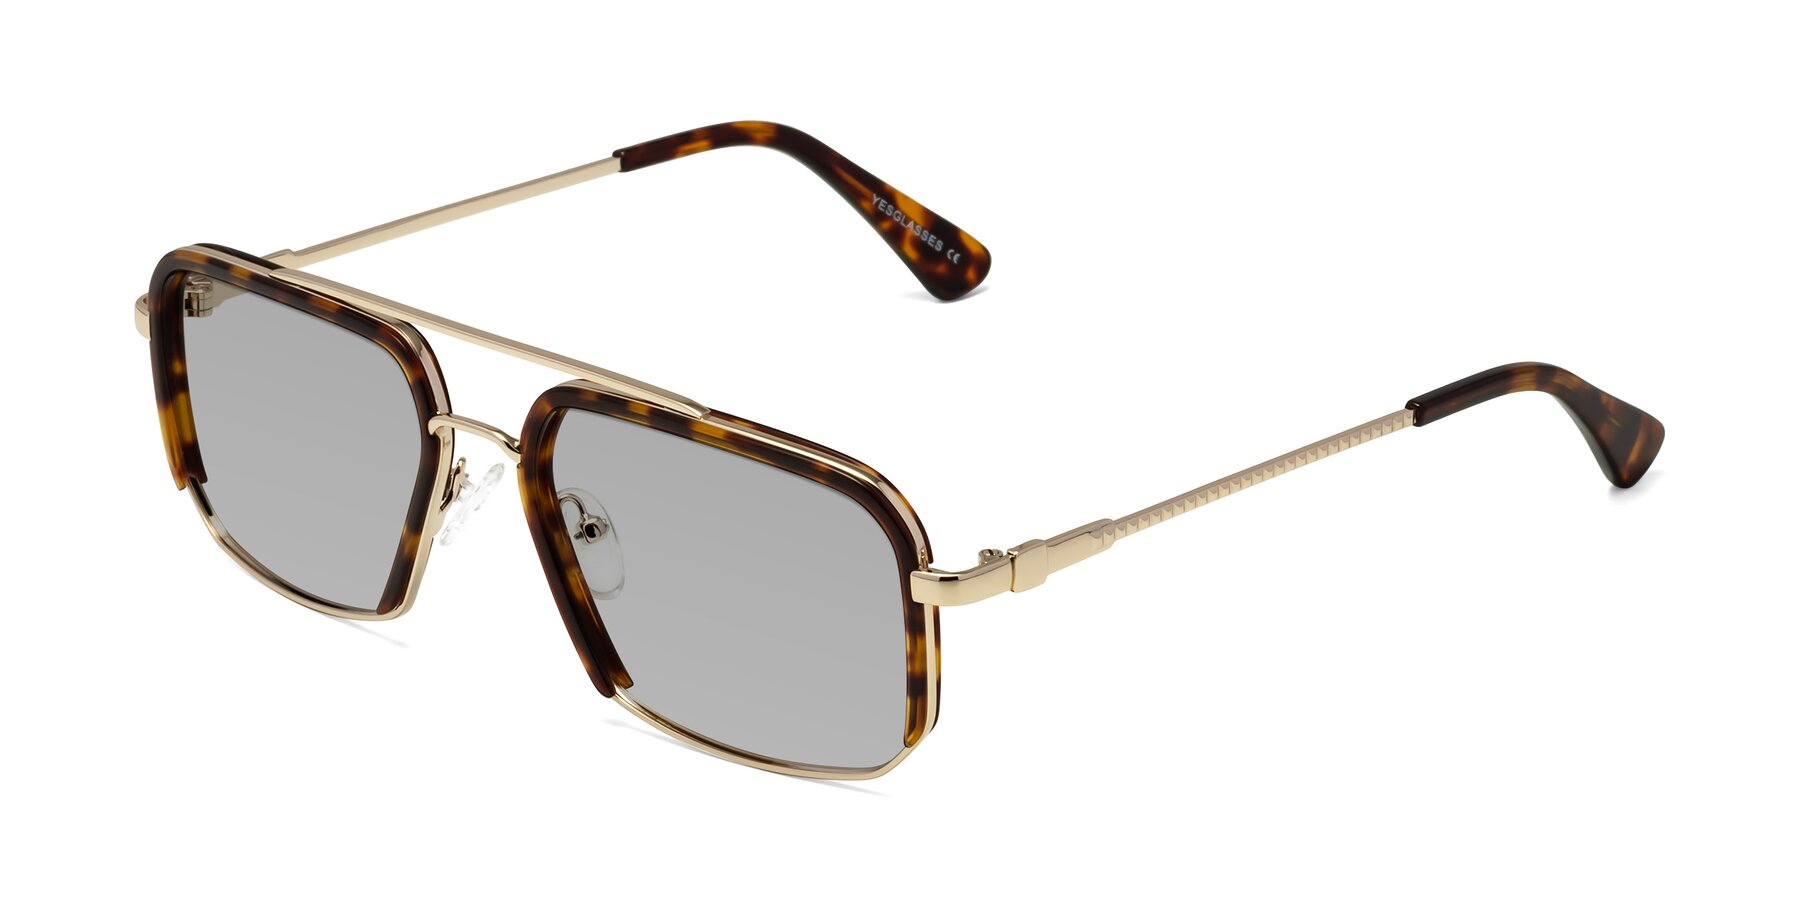 Angle of Dechter in Tortoise-Gold with Light Gray Tinted Lenses